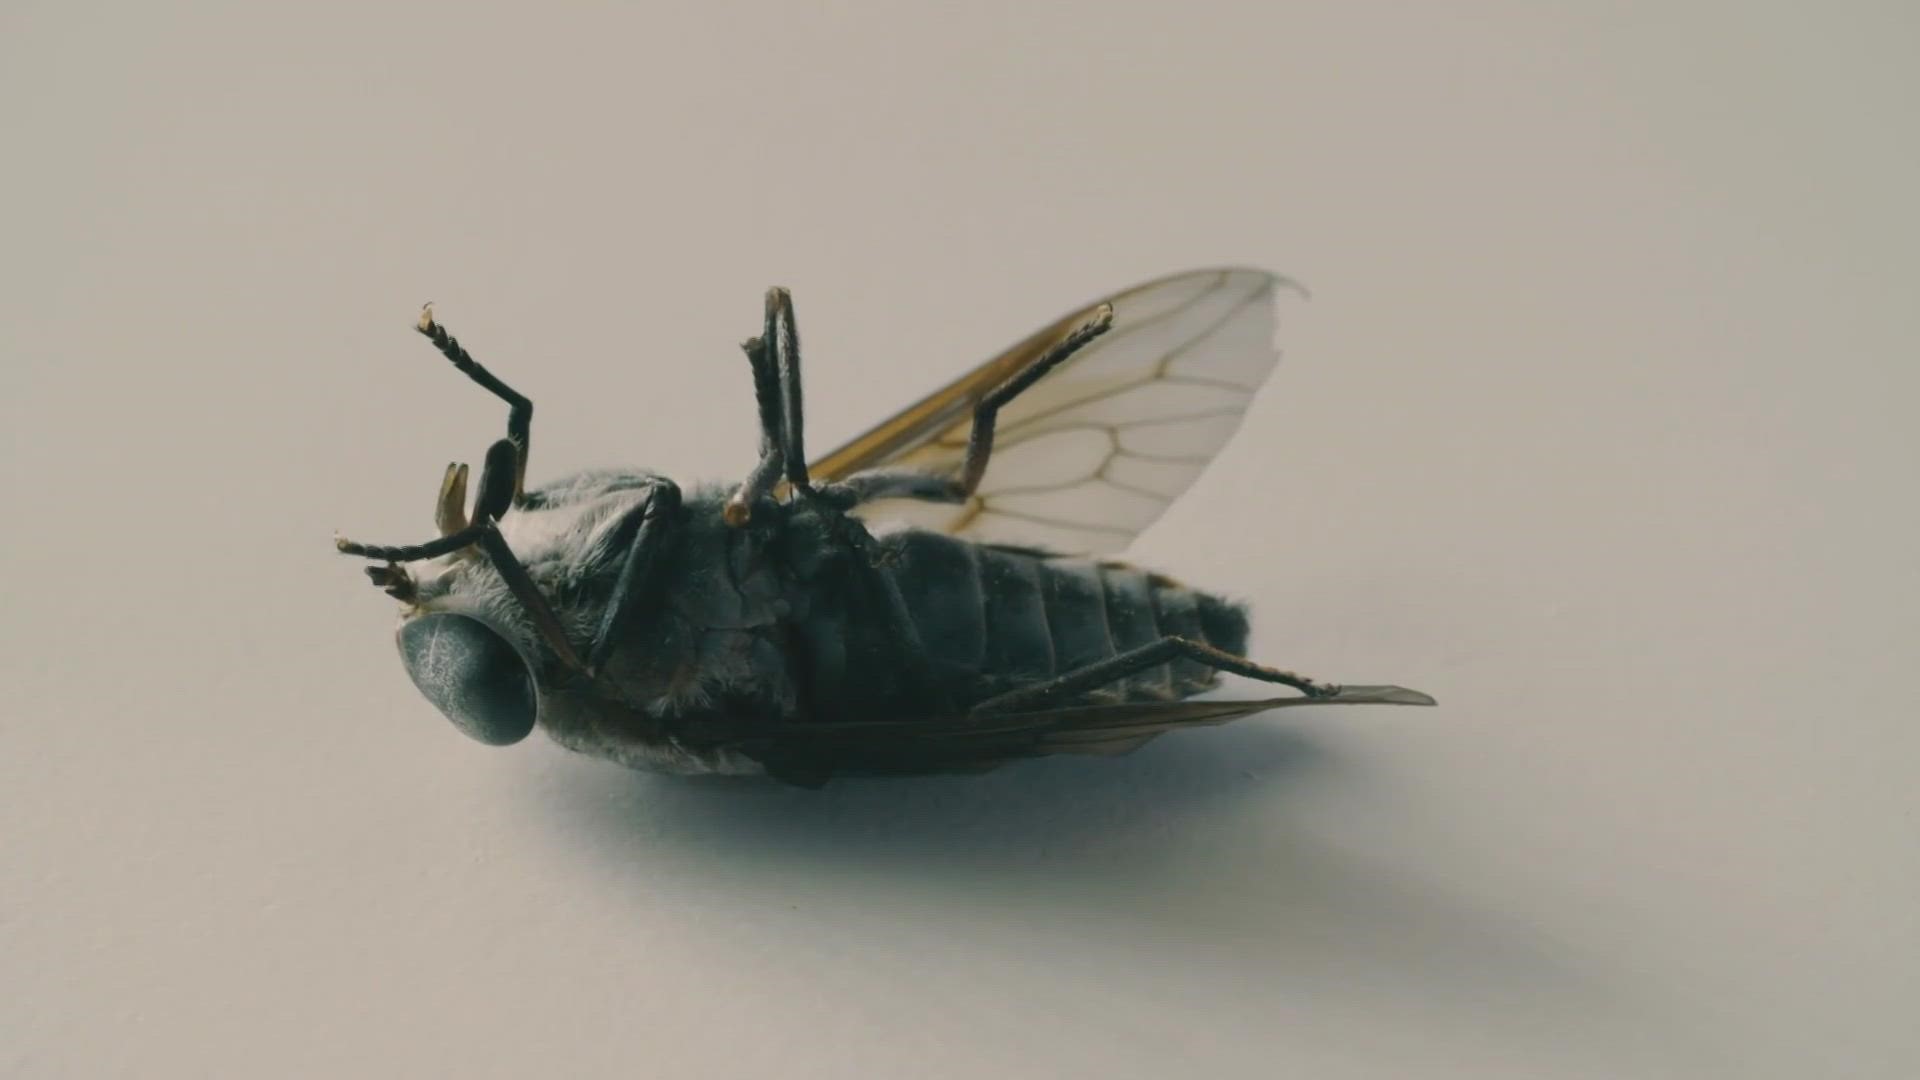 Researchers and students at ASU are helping assist law enforcement investigations by using flies found at crime scenes.